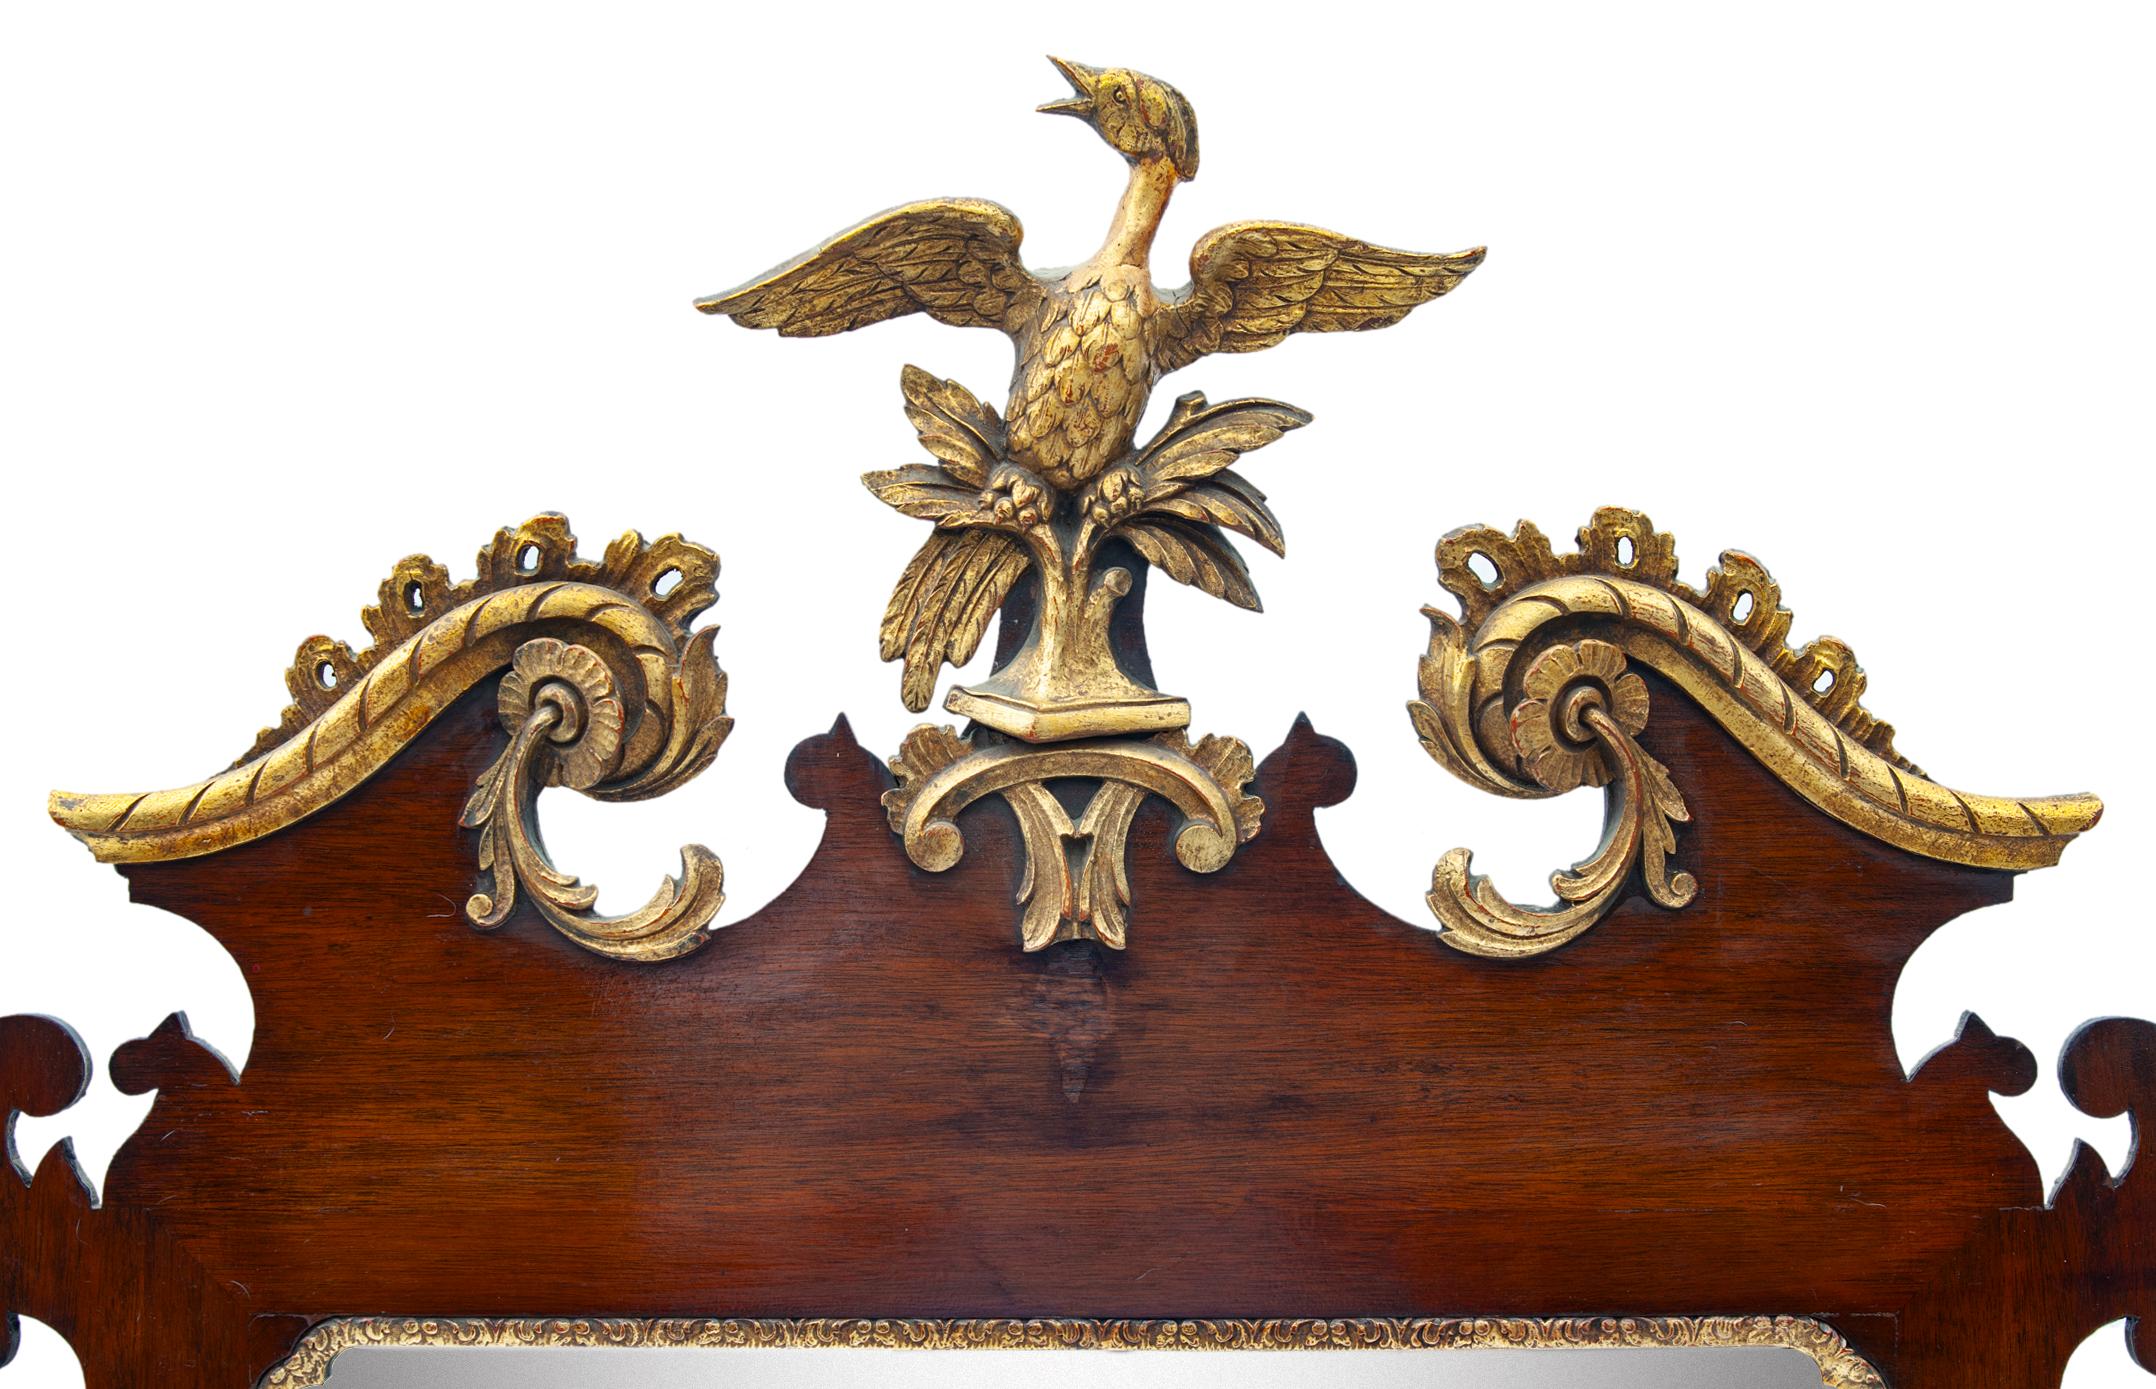 A stunning mahogany and giltwood mirror having highly detailed carvings & a dramatic pediment adorned with a Phoenix. There is a wonderful hand carved and gilt Eagle/Phoenix at the top of the mirror. The mirrored glass and backboard are original.